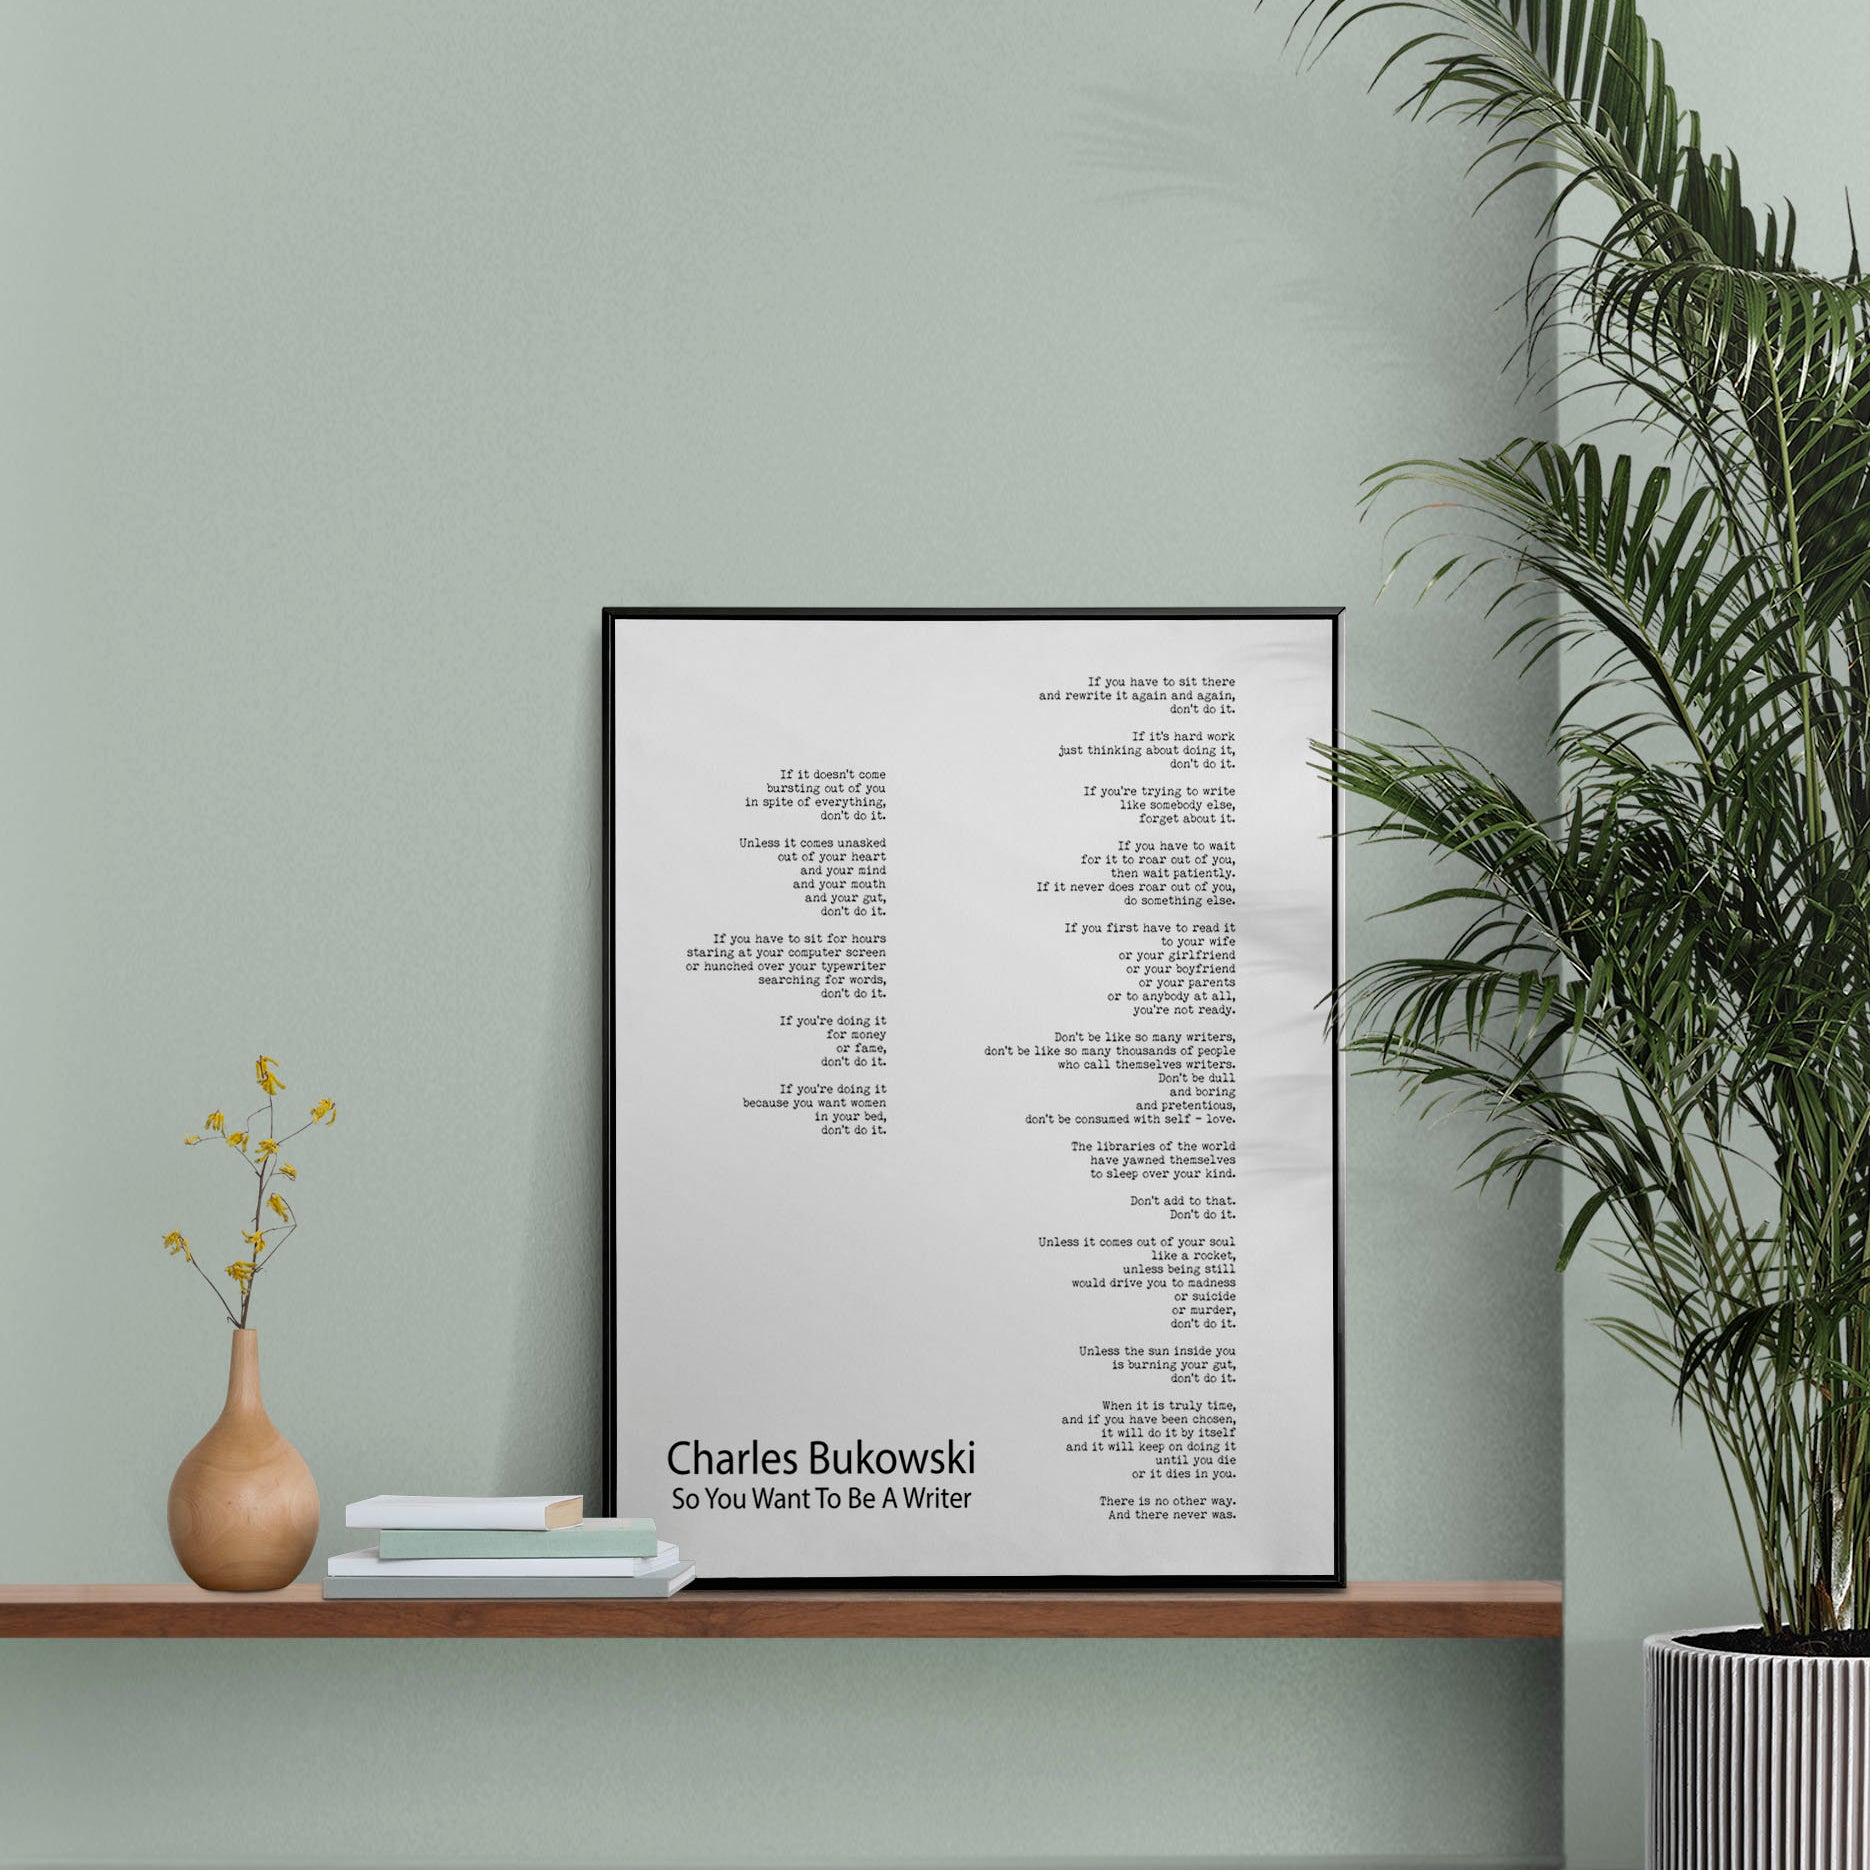 Charles Bukowski Poem Quote Print, Minimalist Black & White Poster Art Print - "So You Want To Be A Writer" Poetry Wall Art